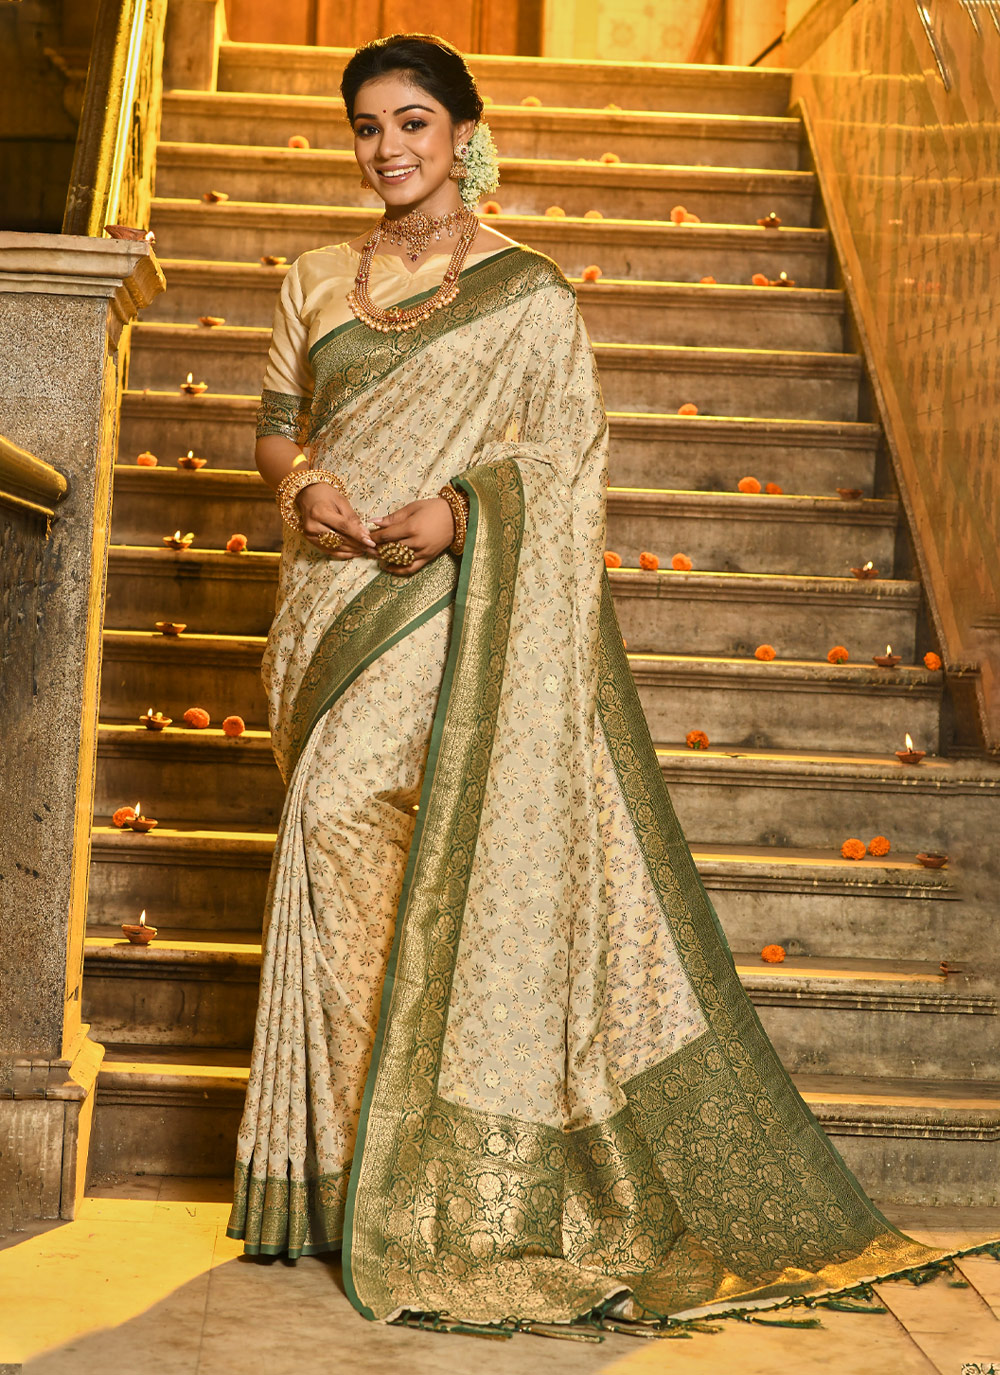 Classy Sandal Colour saree with Red Vanki Model Blouse | Photo Gallery -  www.Wedandbeyond.com